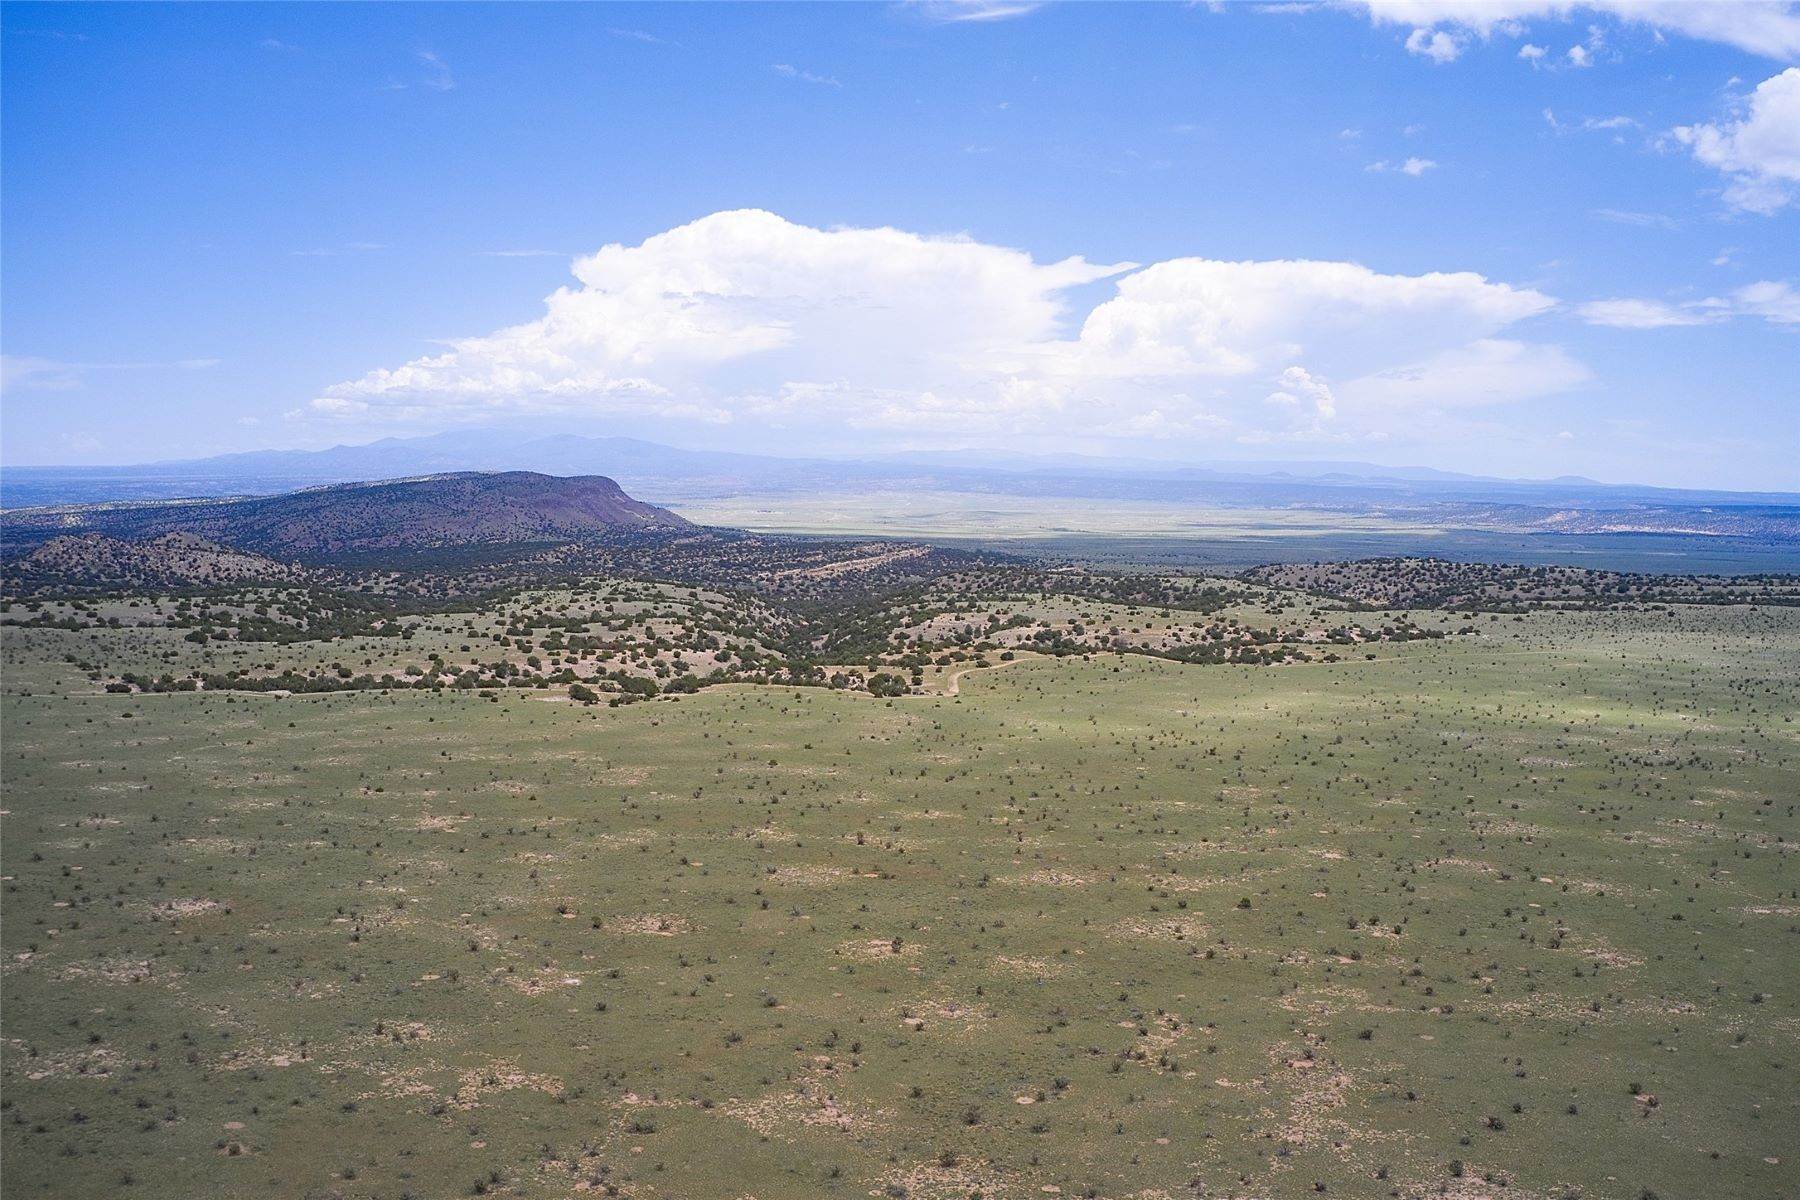 20. Farm and Ranch Properties at 221 Simmons Stanley, New Mexico 87056 United States